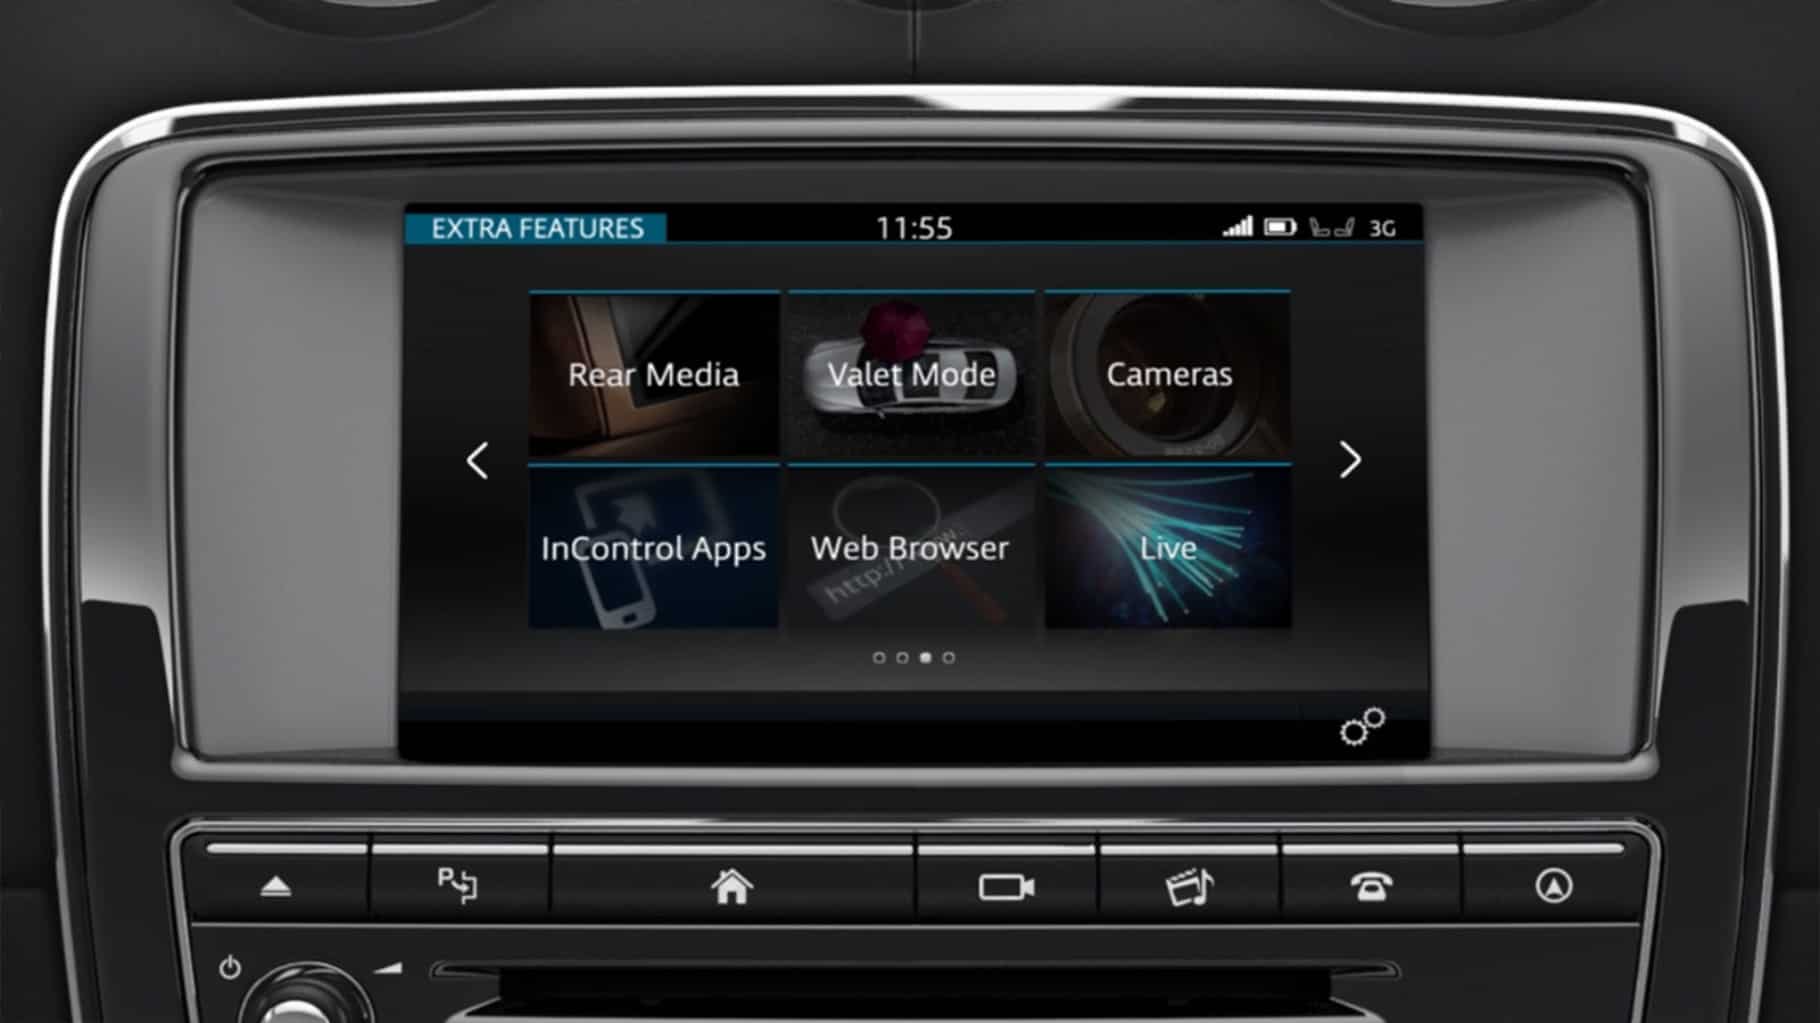 Jaguar XJ's InControl Touch Pro: Extra Features information video.